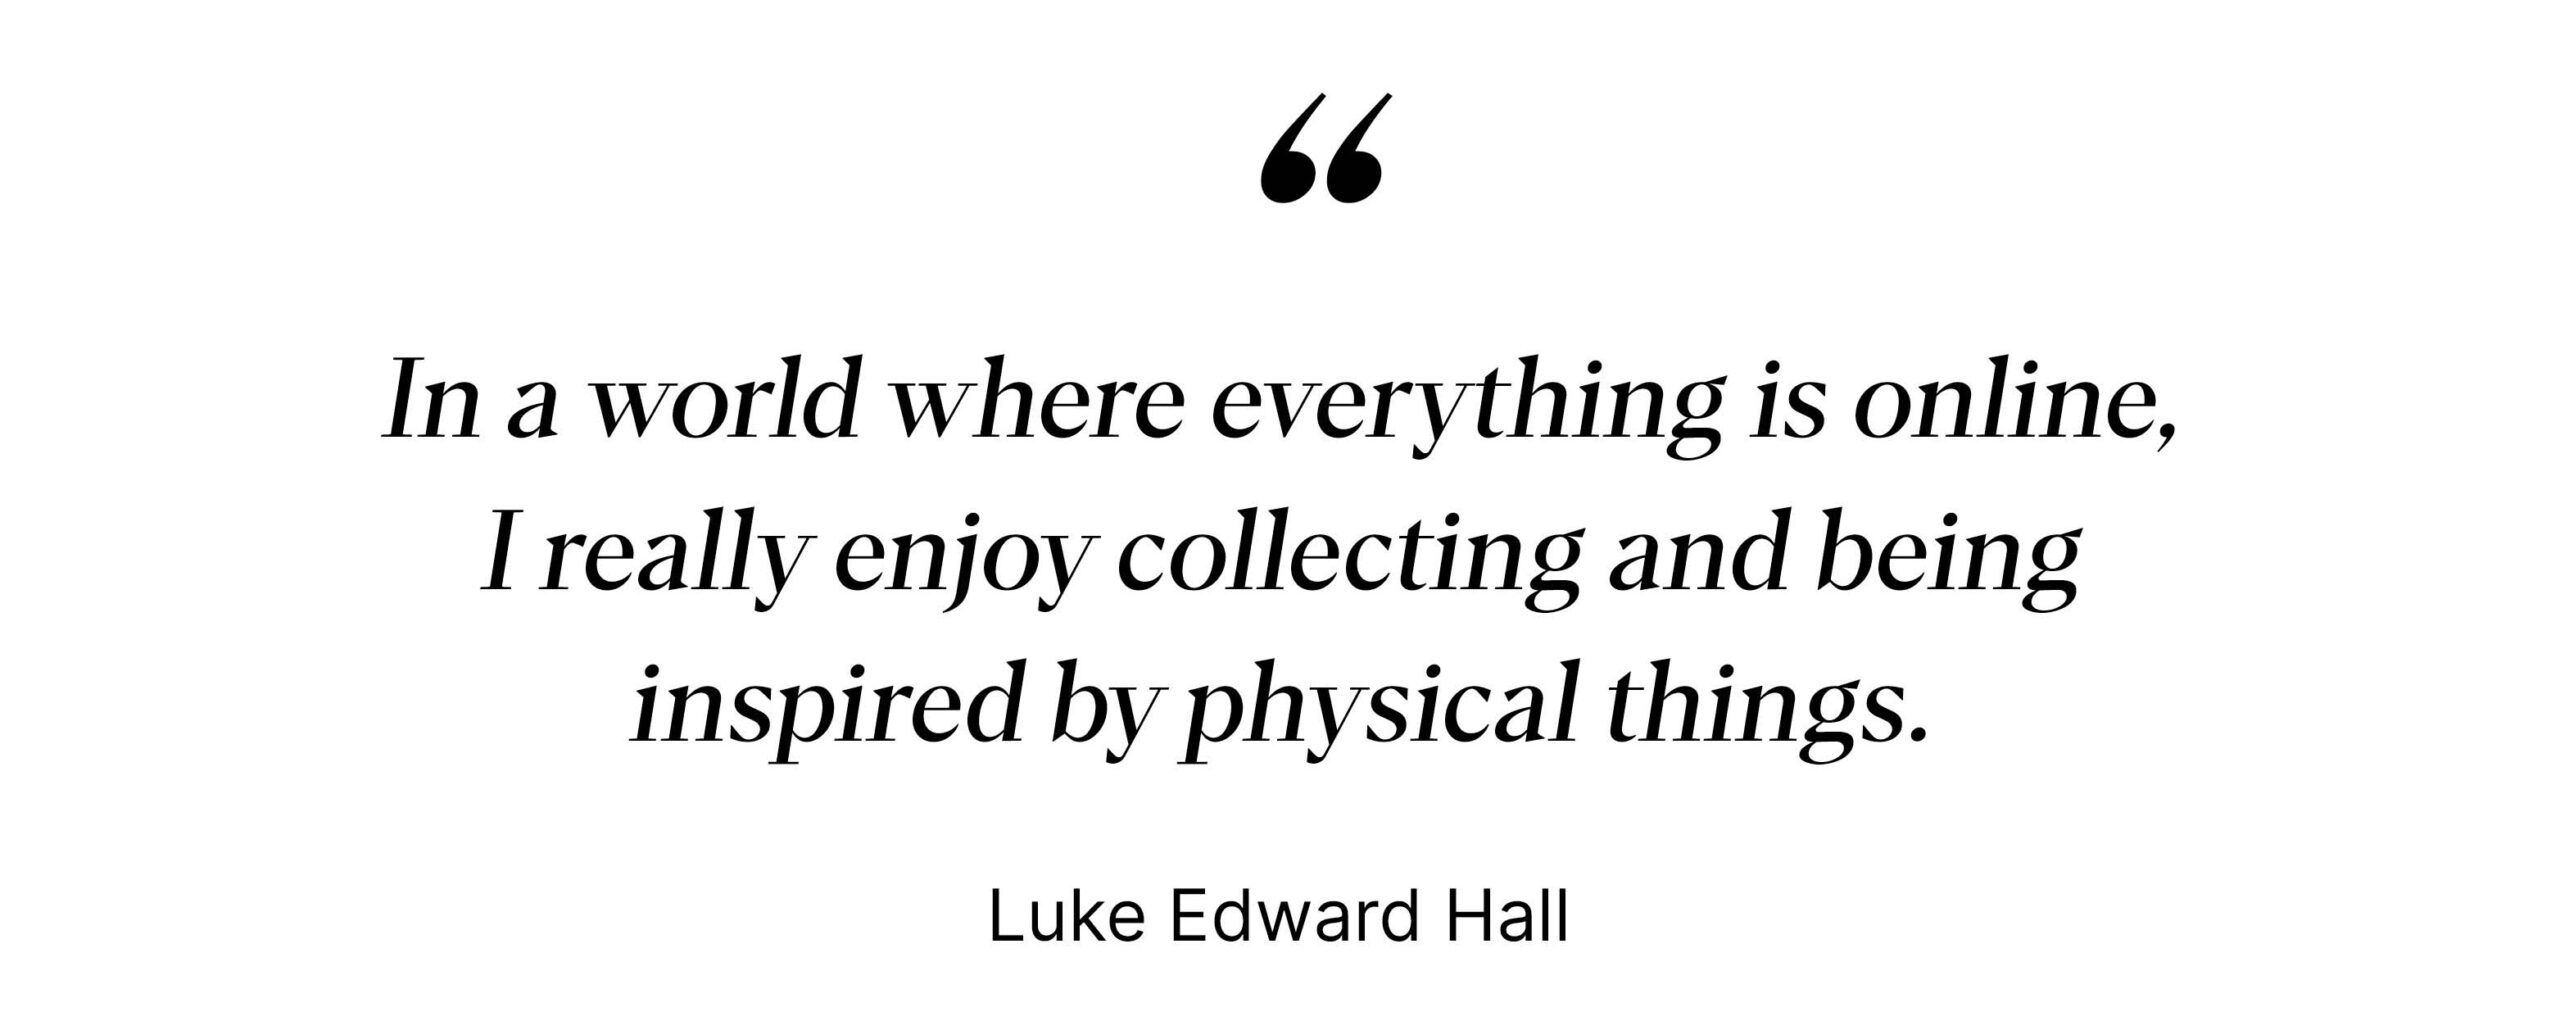 "In a world where everything is online, I really enjoy collecting and being inspired by physical things." - Luke Edward Hall